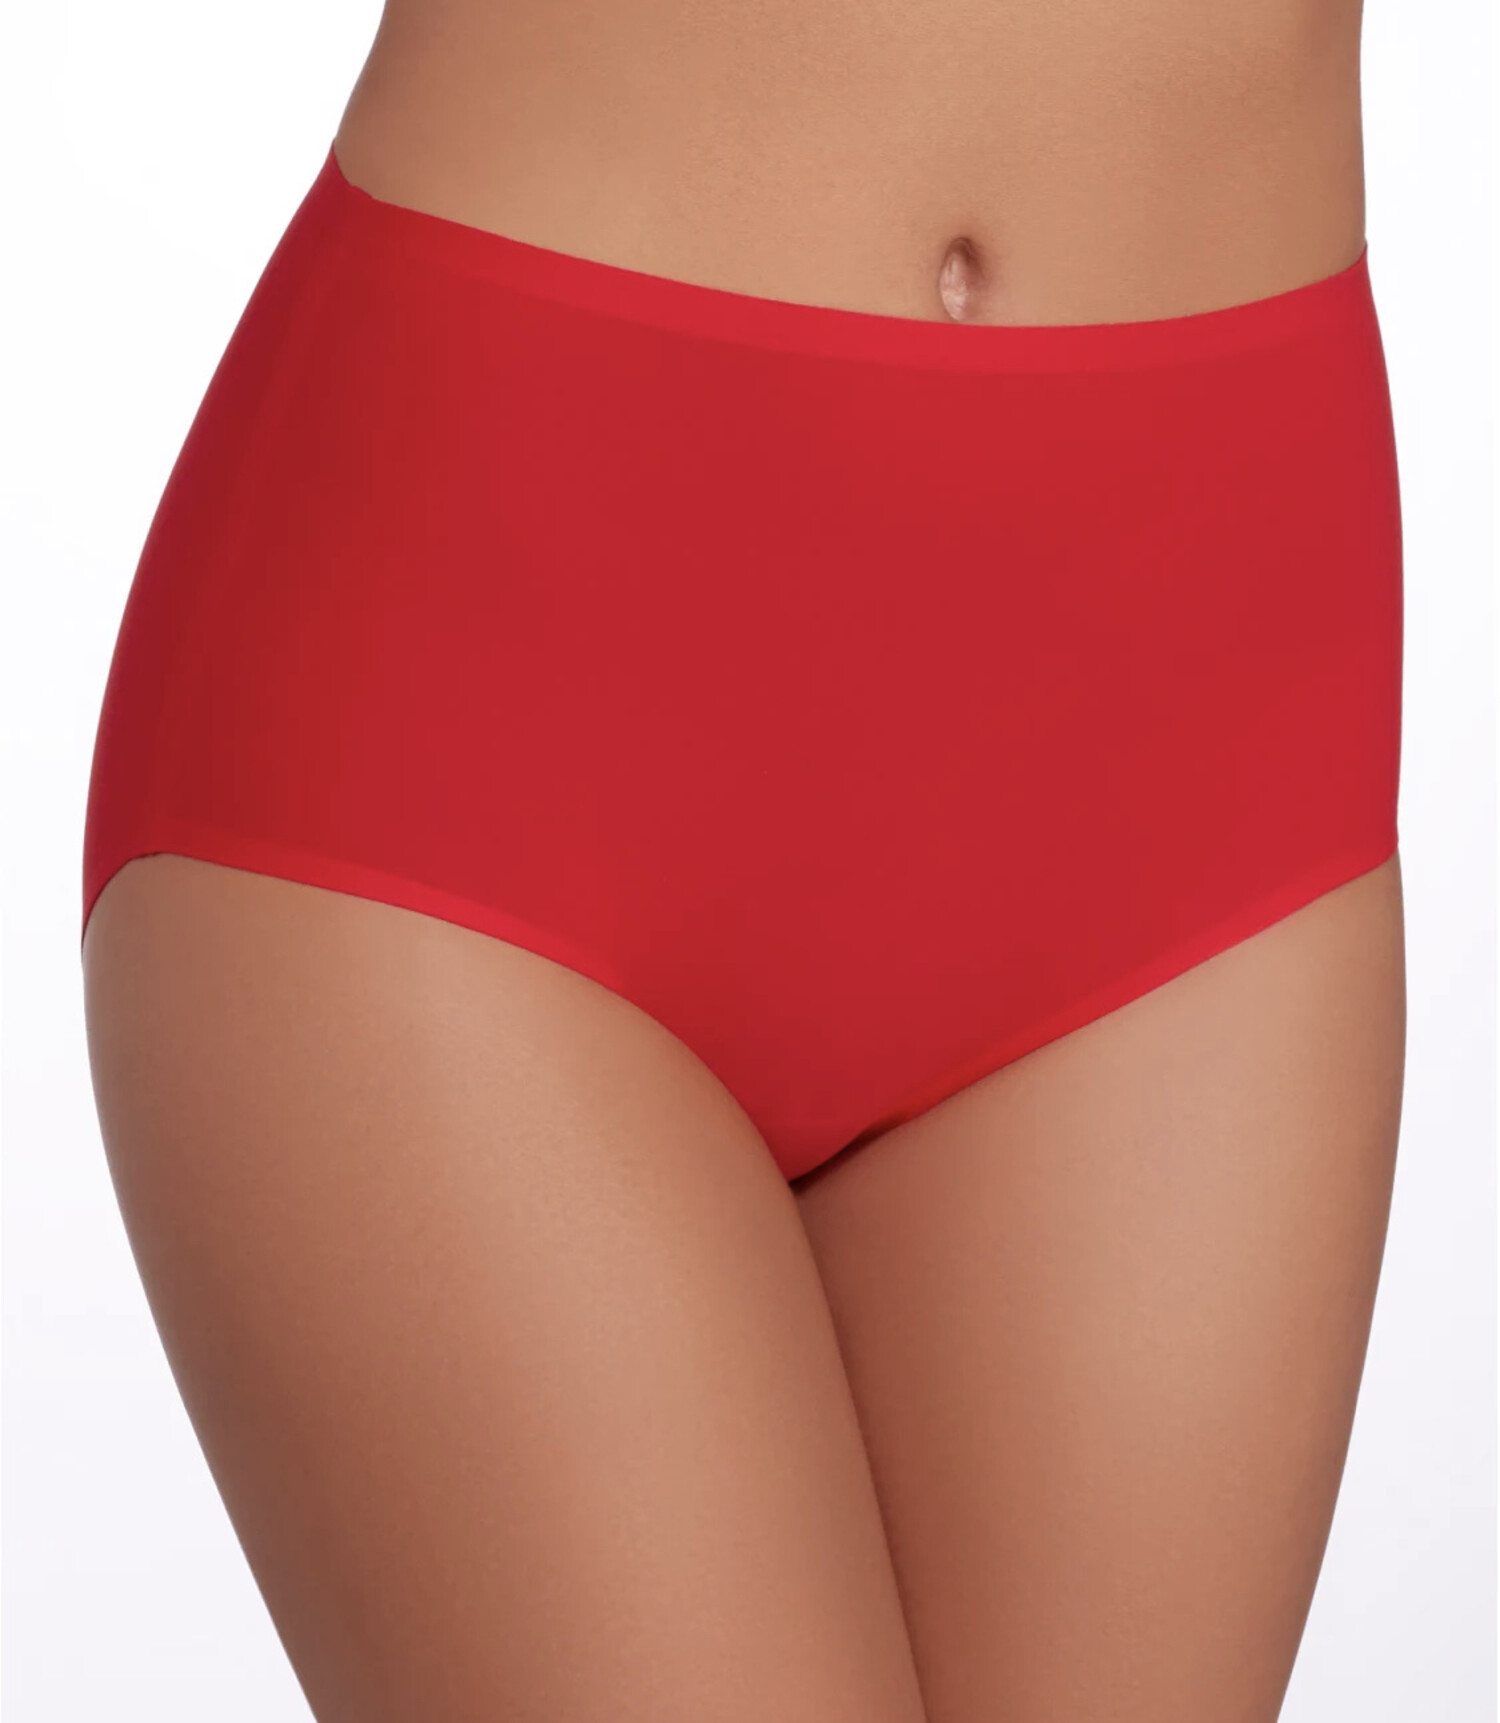 Chantelle Soft Stretch Seamless Full Briefs One Size 2647